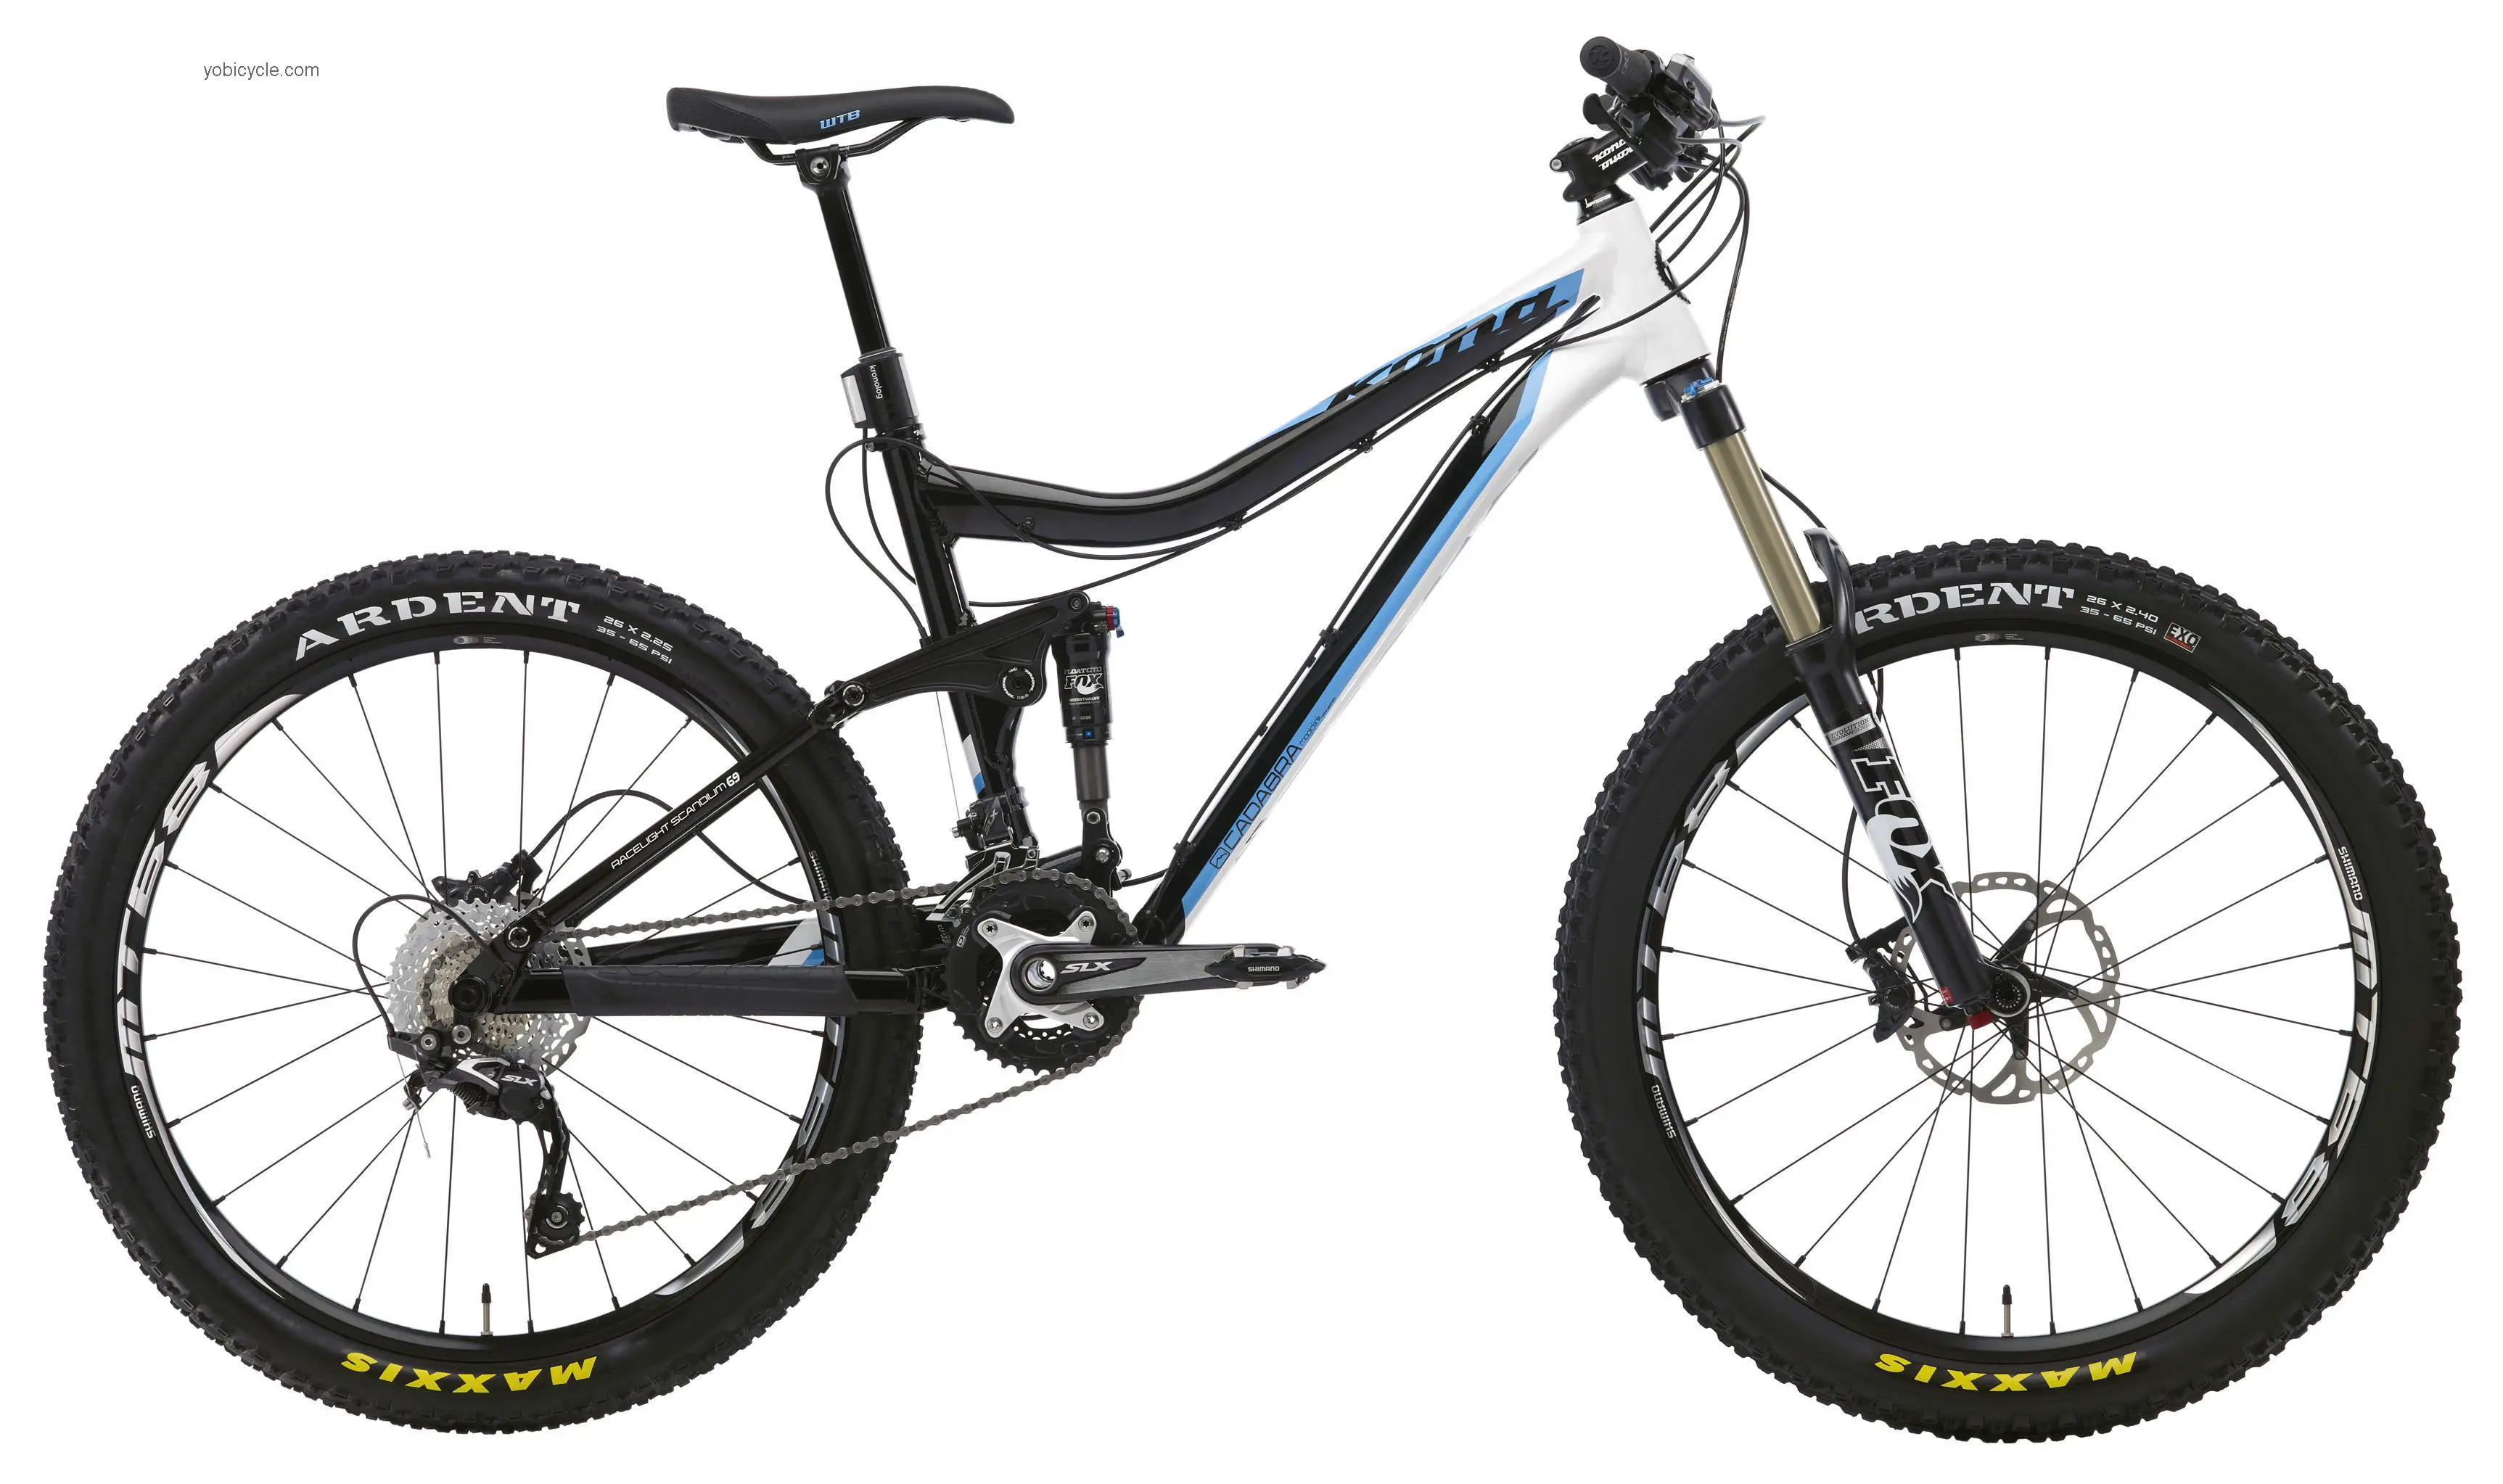 Kona Cadabra competitors and comparison tool online specs and performance